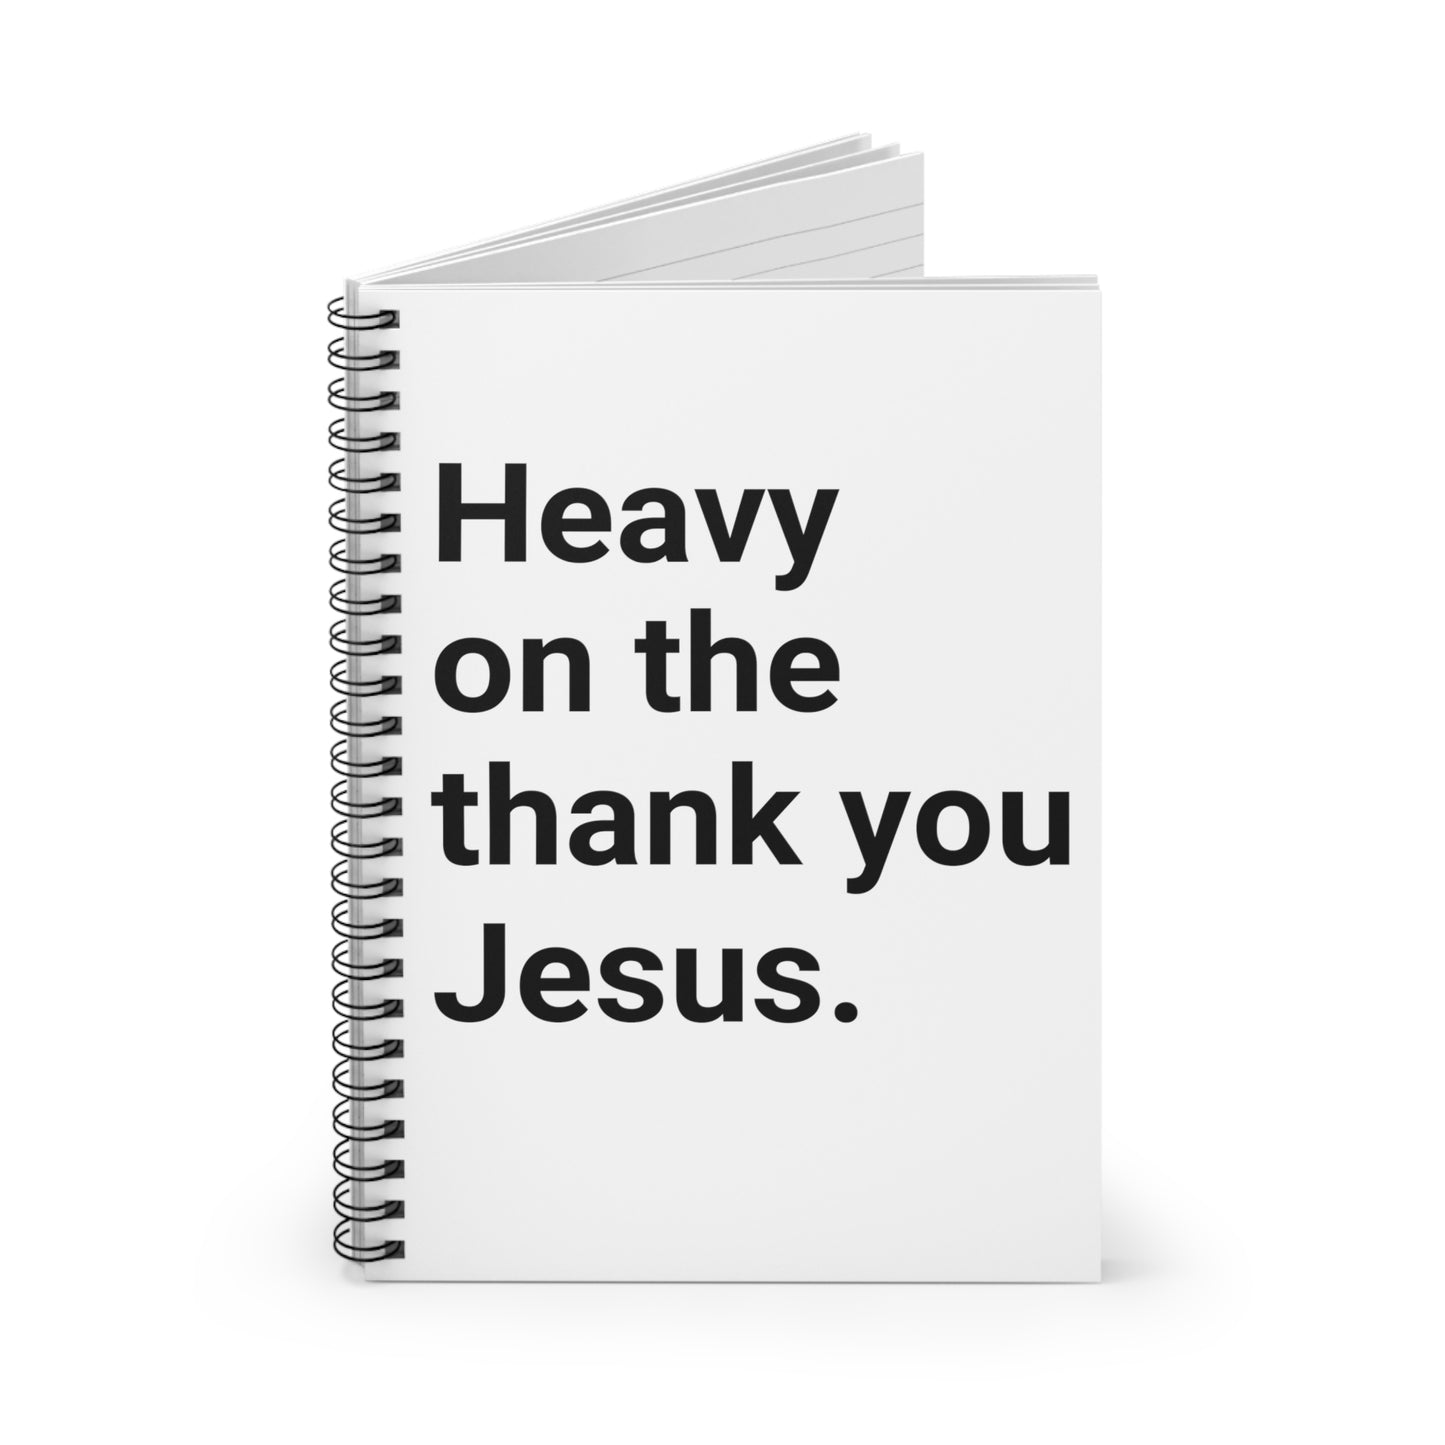 Heavy on the thank you Jesus Notebook - Ruled Line